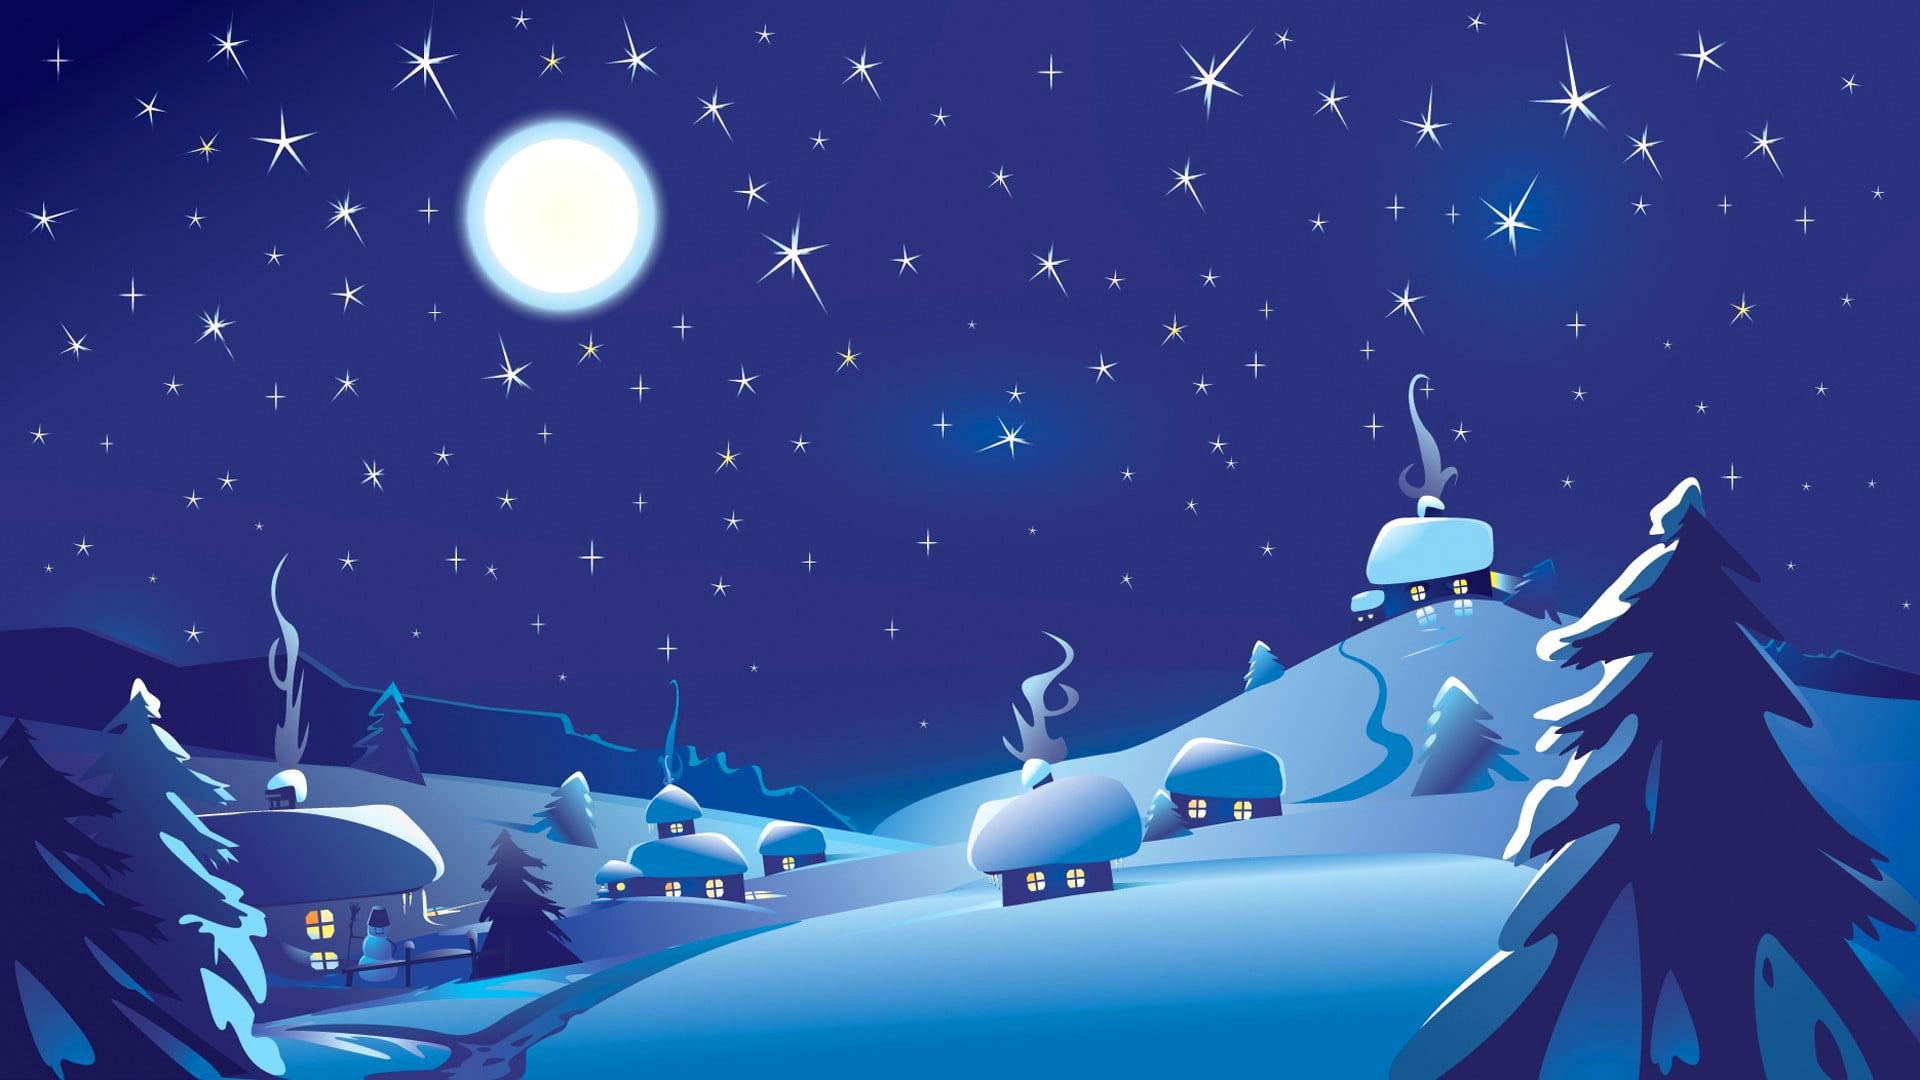 Wallpaper House Covered With Snow During Night Illustration